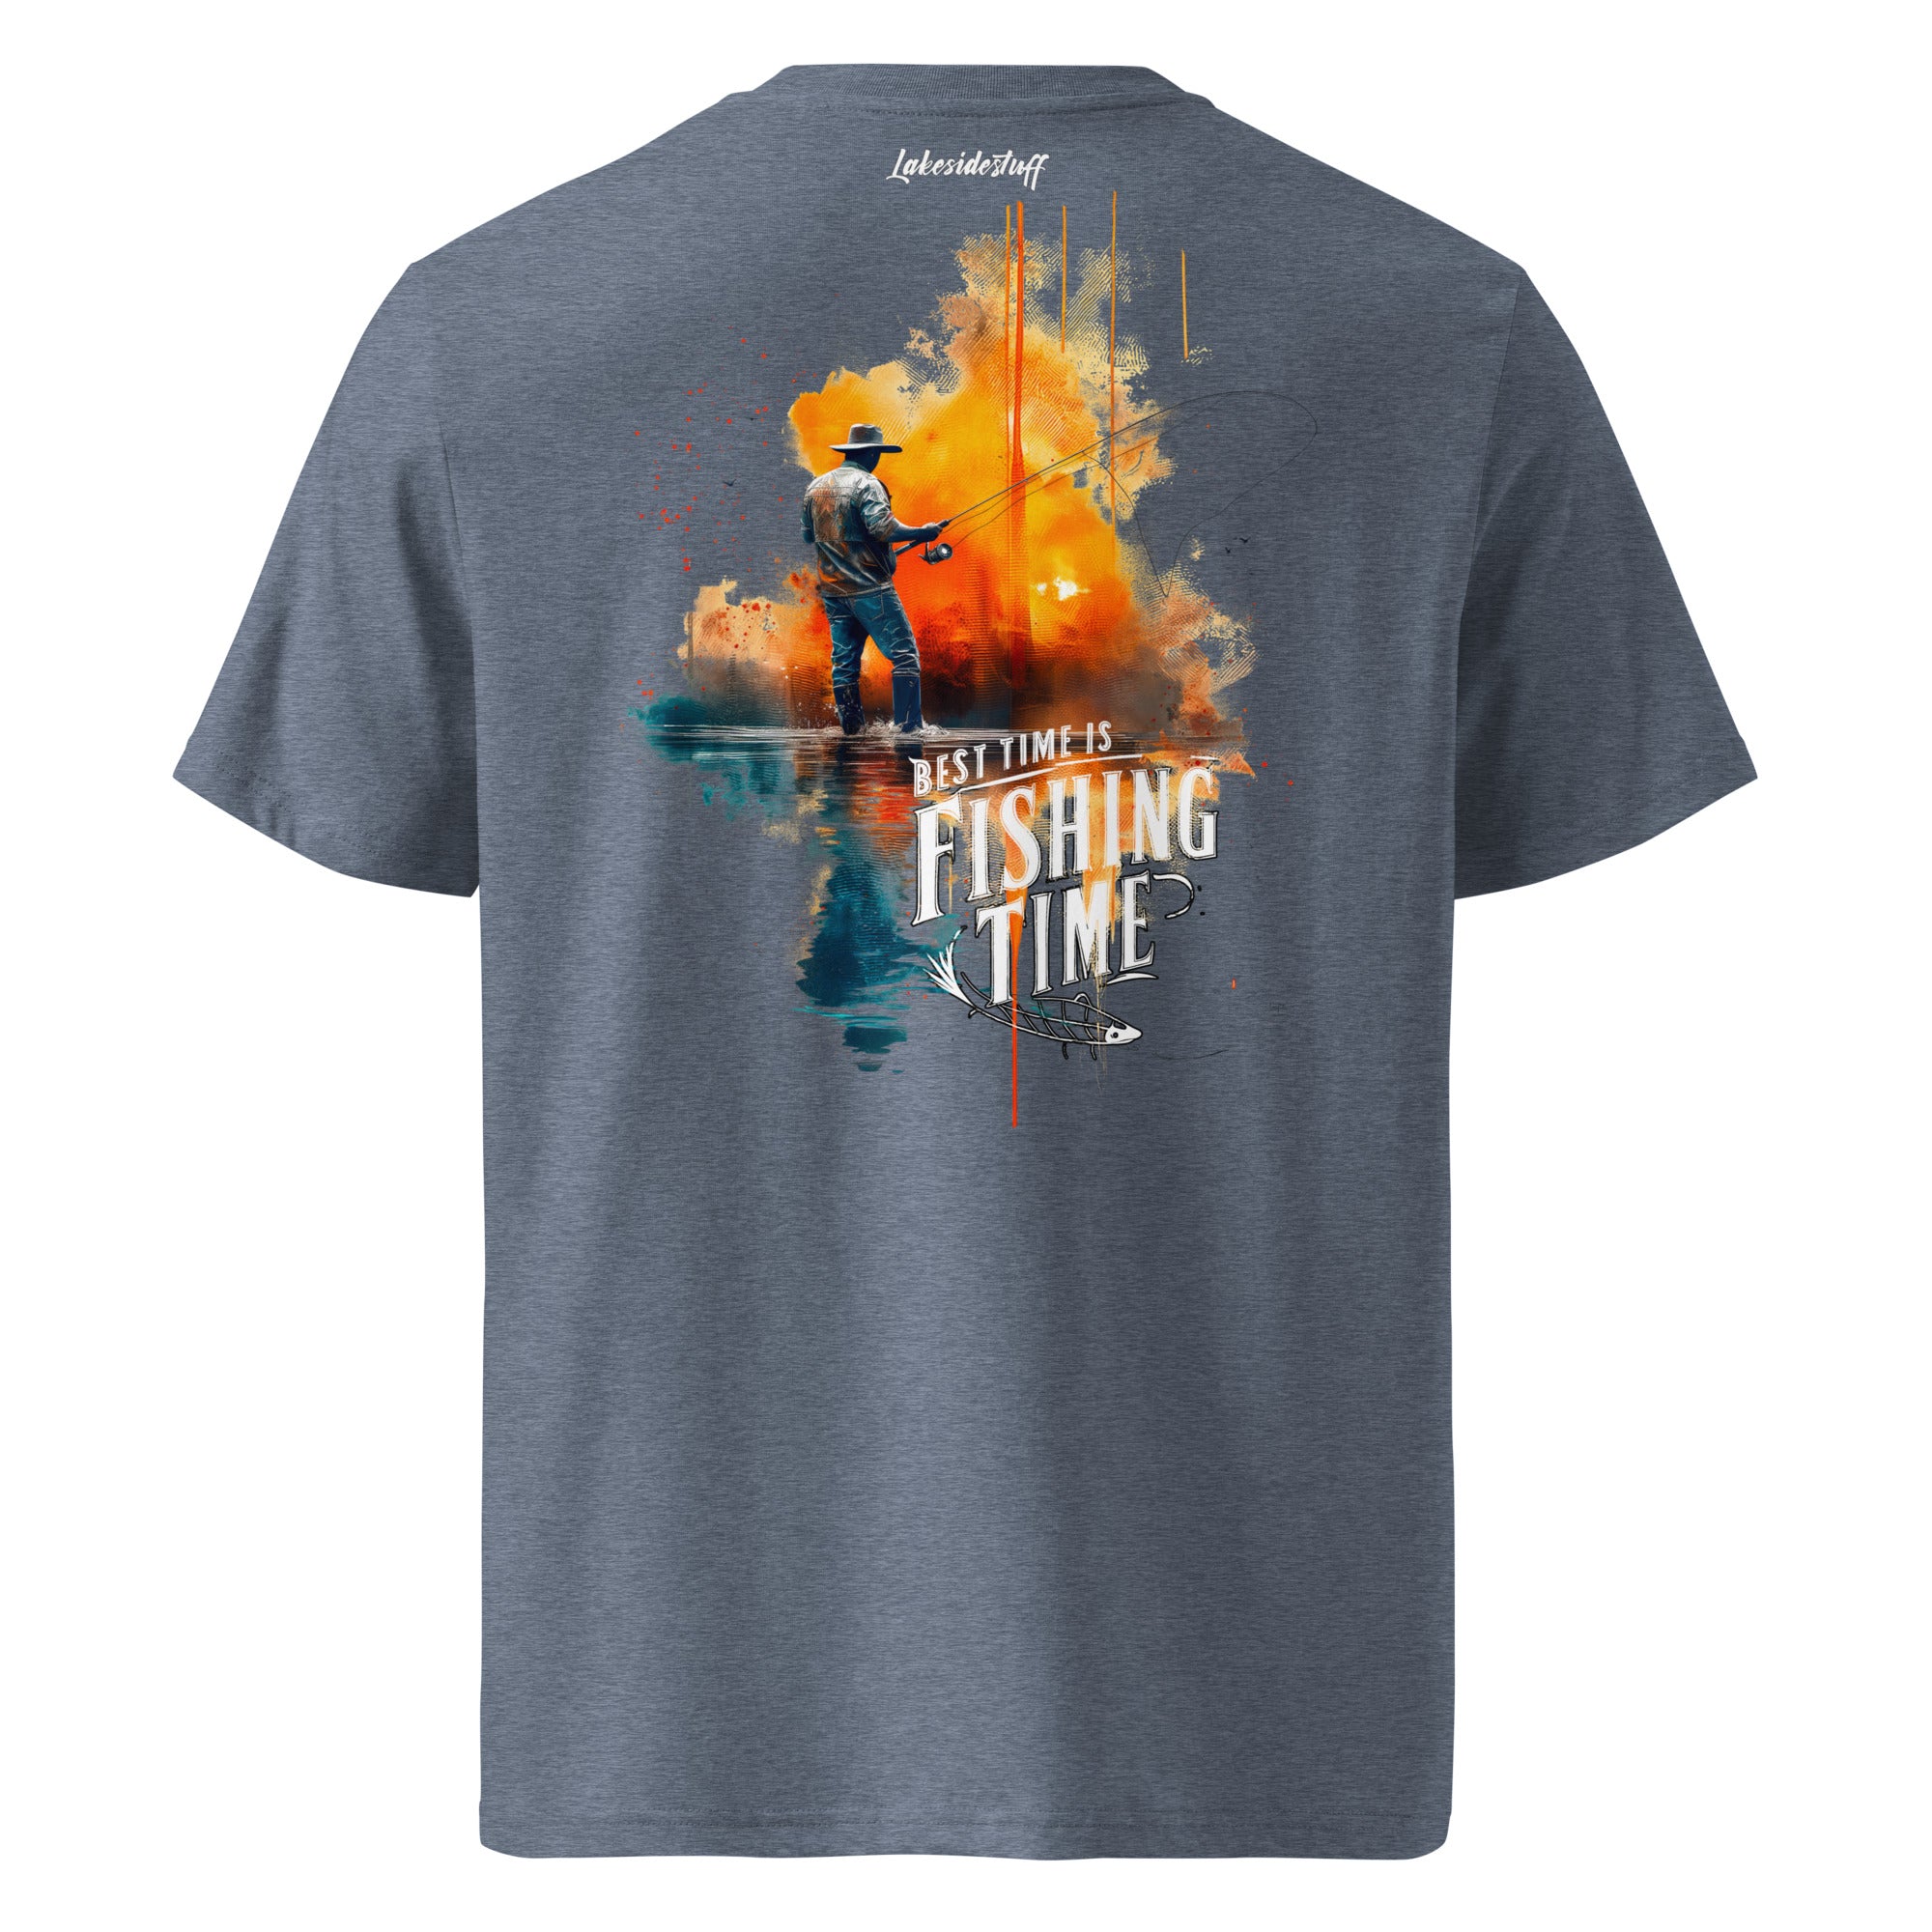 T-Shirt - Backprint - Best time is fishing time